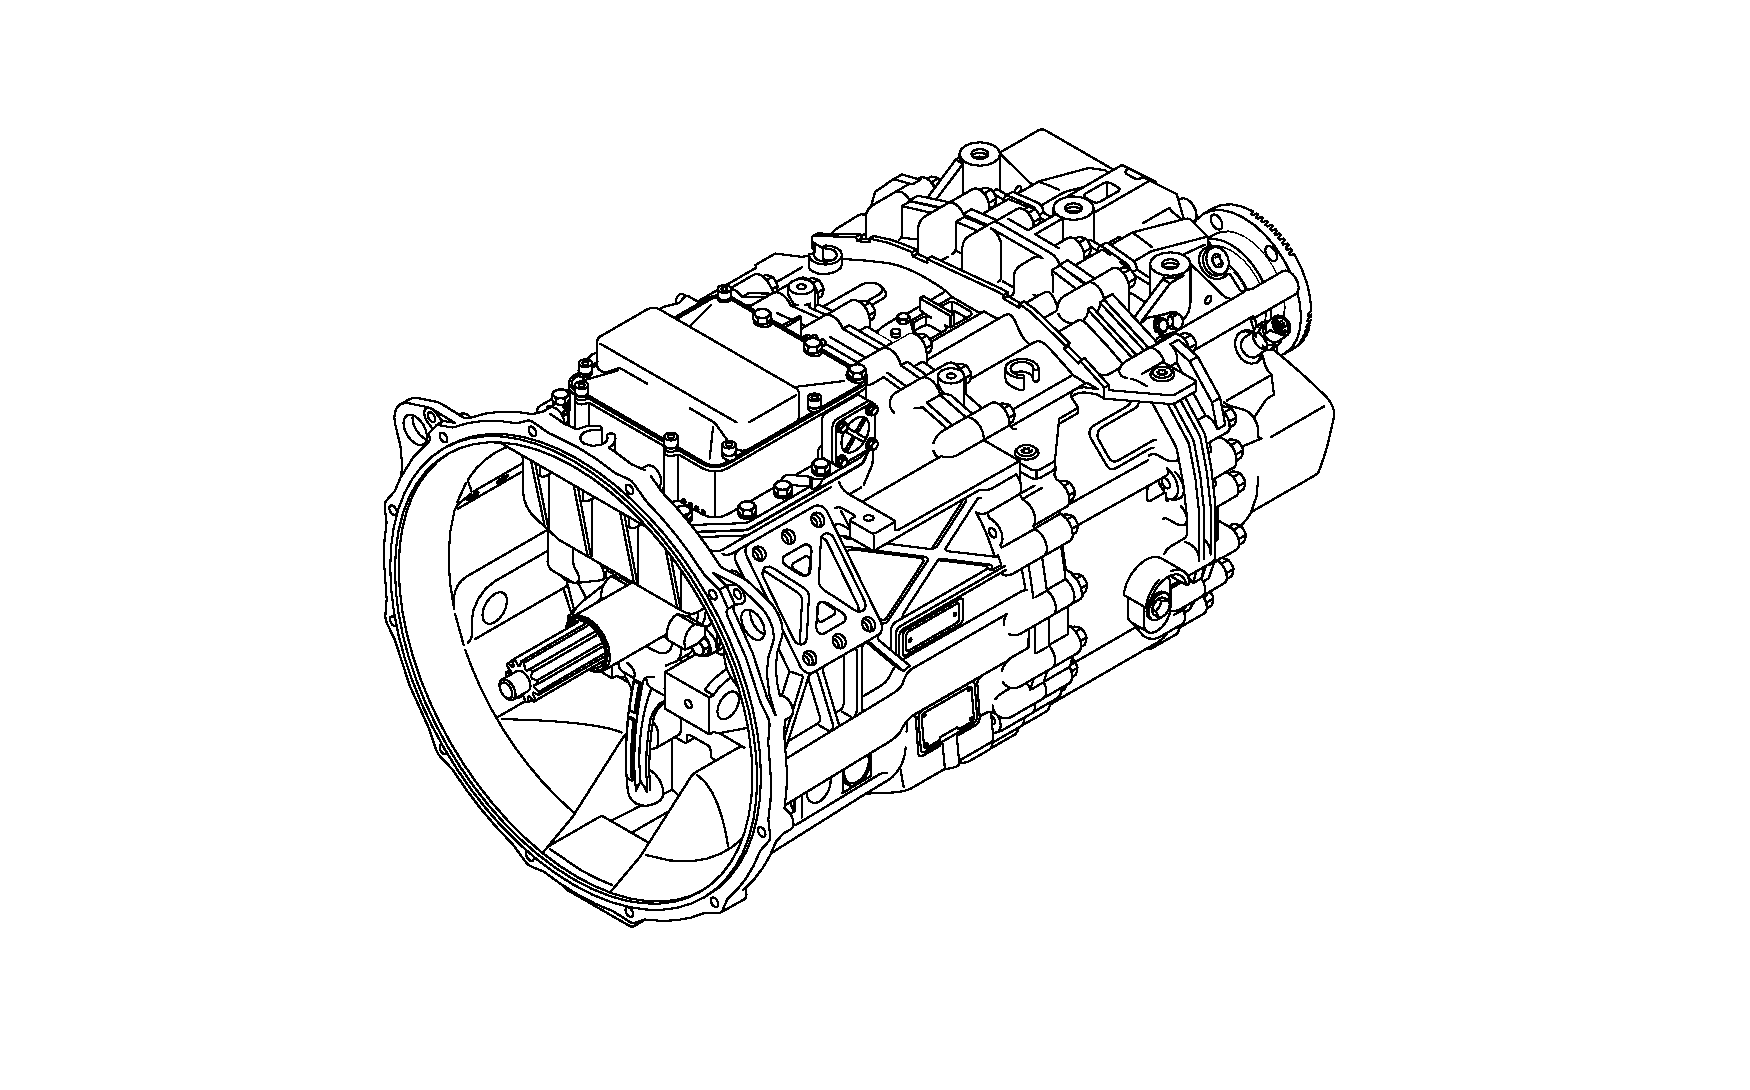 drawing for ISUZU MOTORS LIMITED 1-33043-367-0 - 16 AS 2200